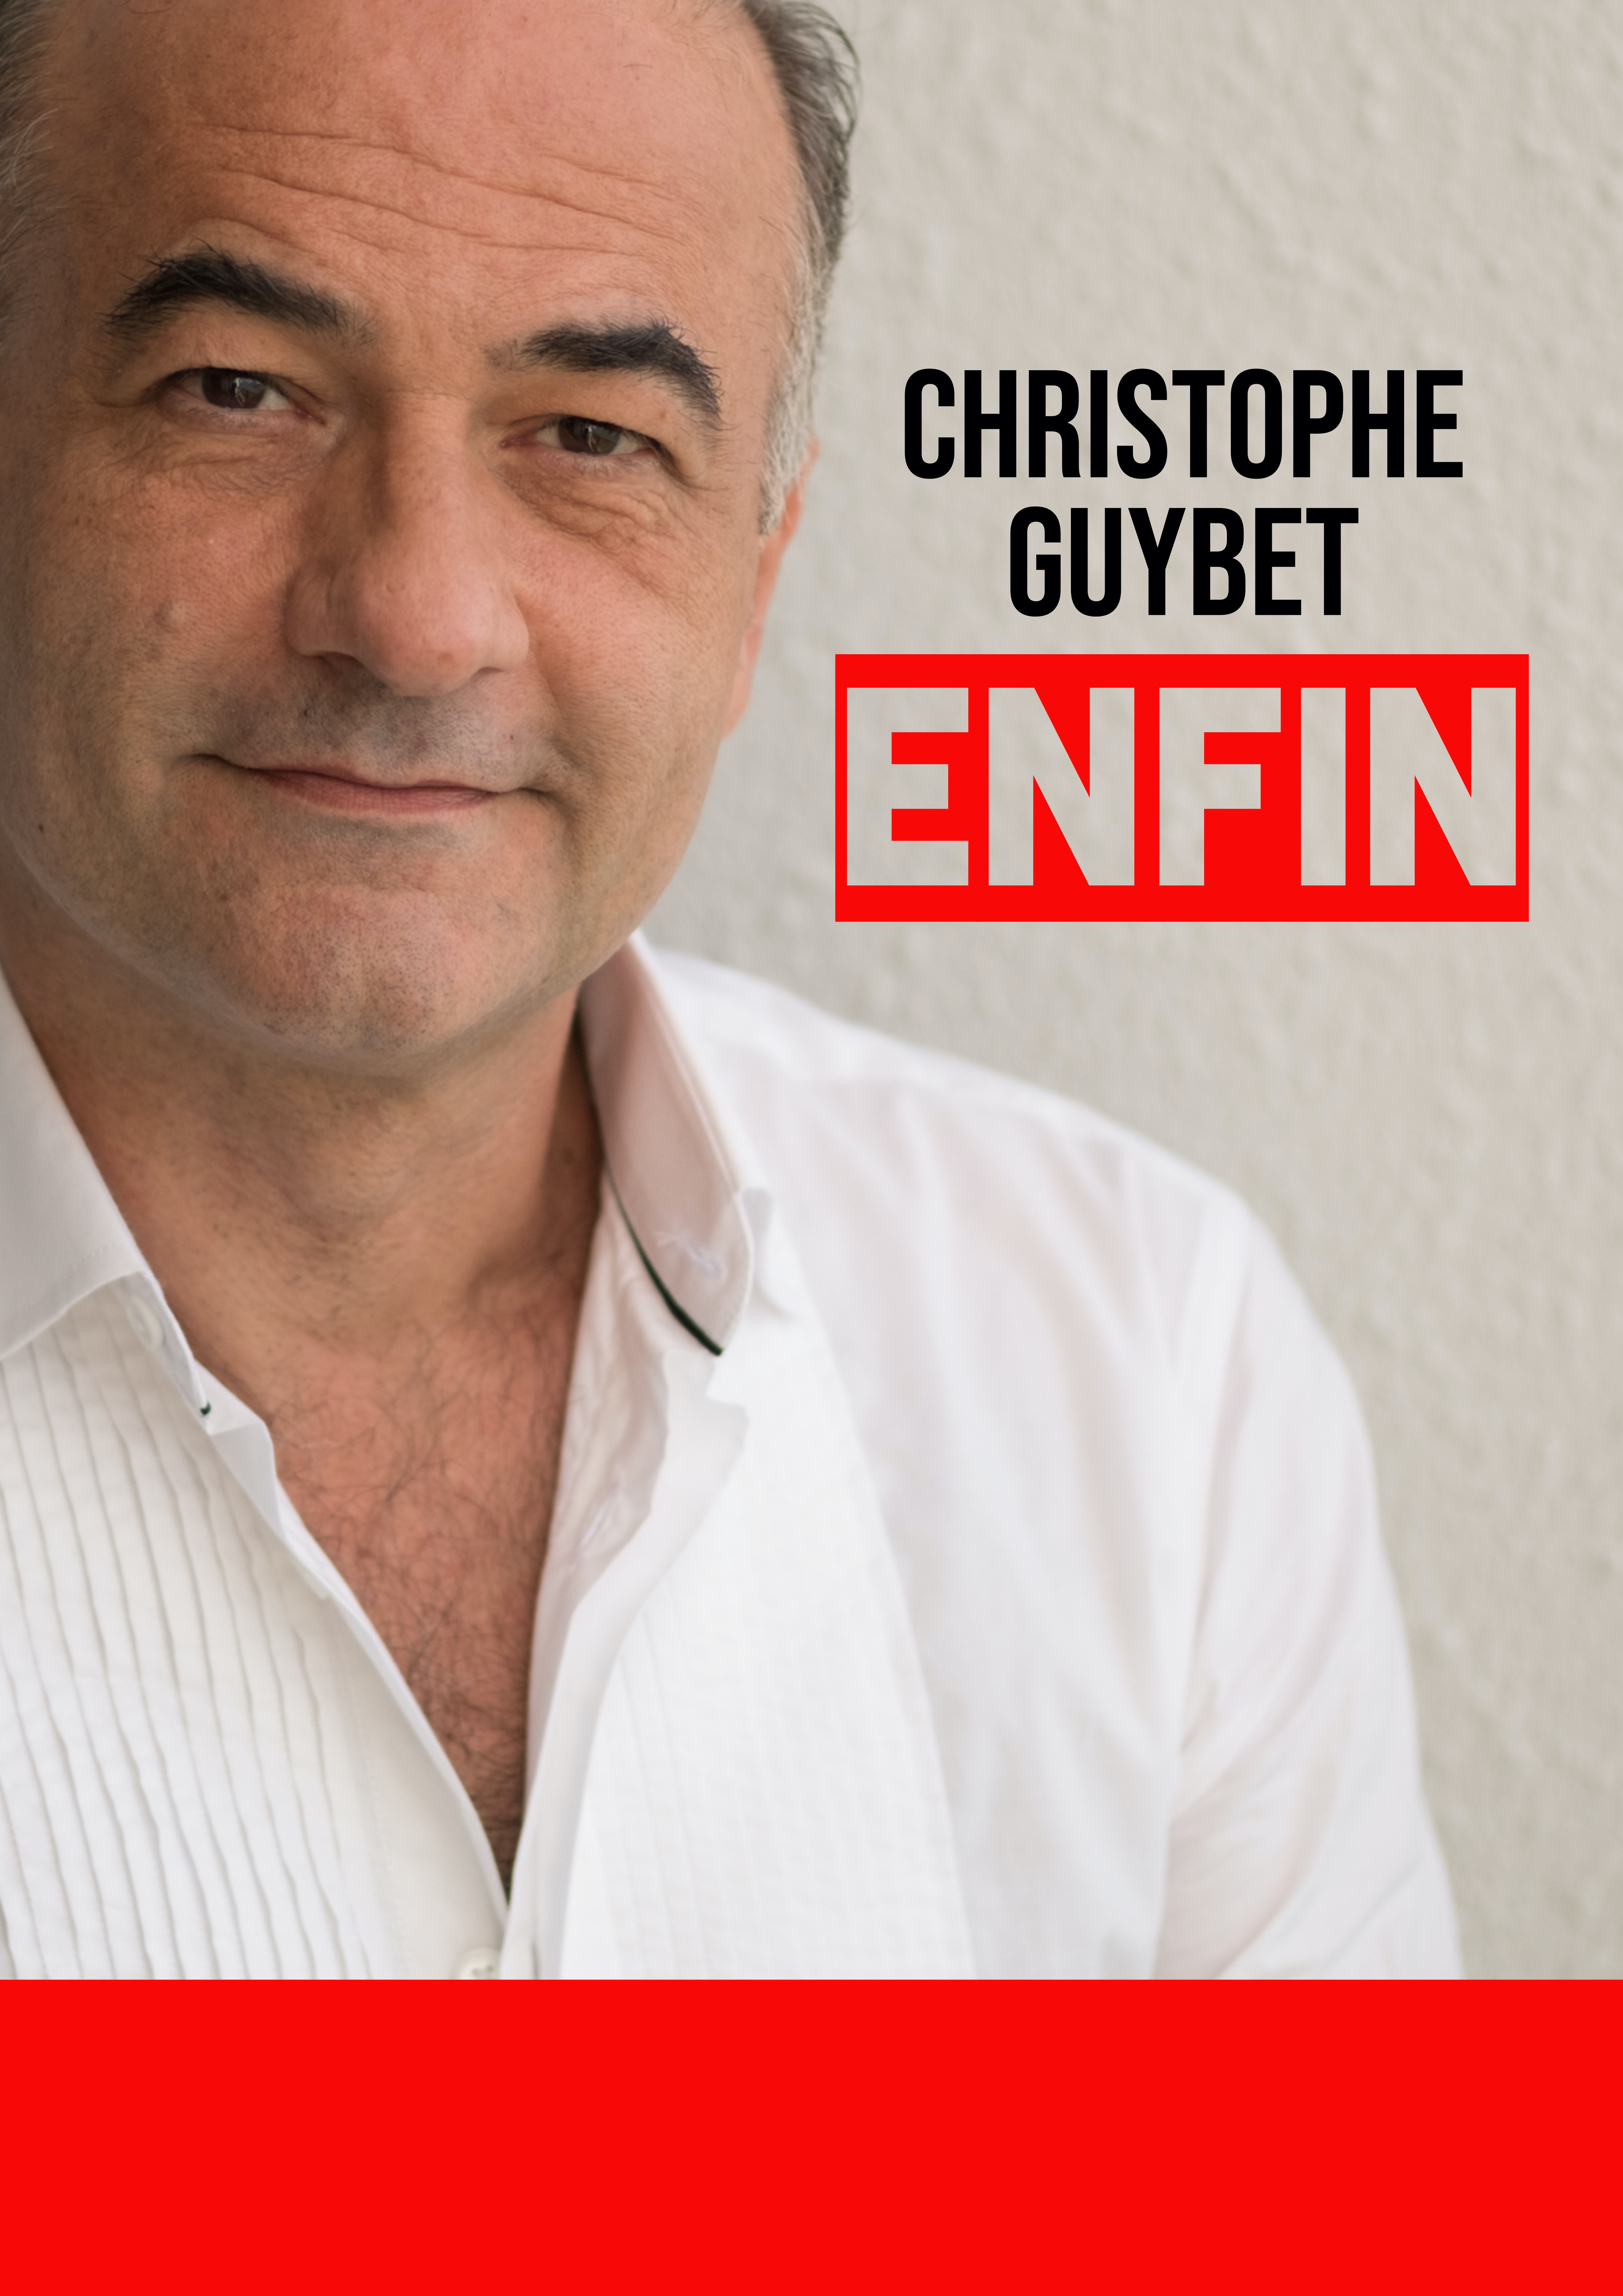 200626_GUYBET Christophe_A3